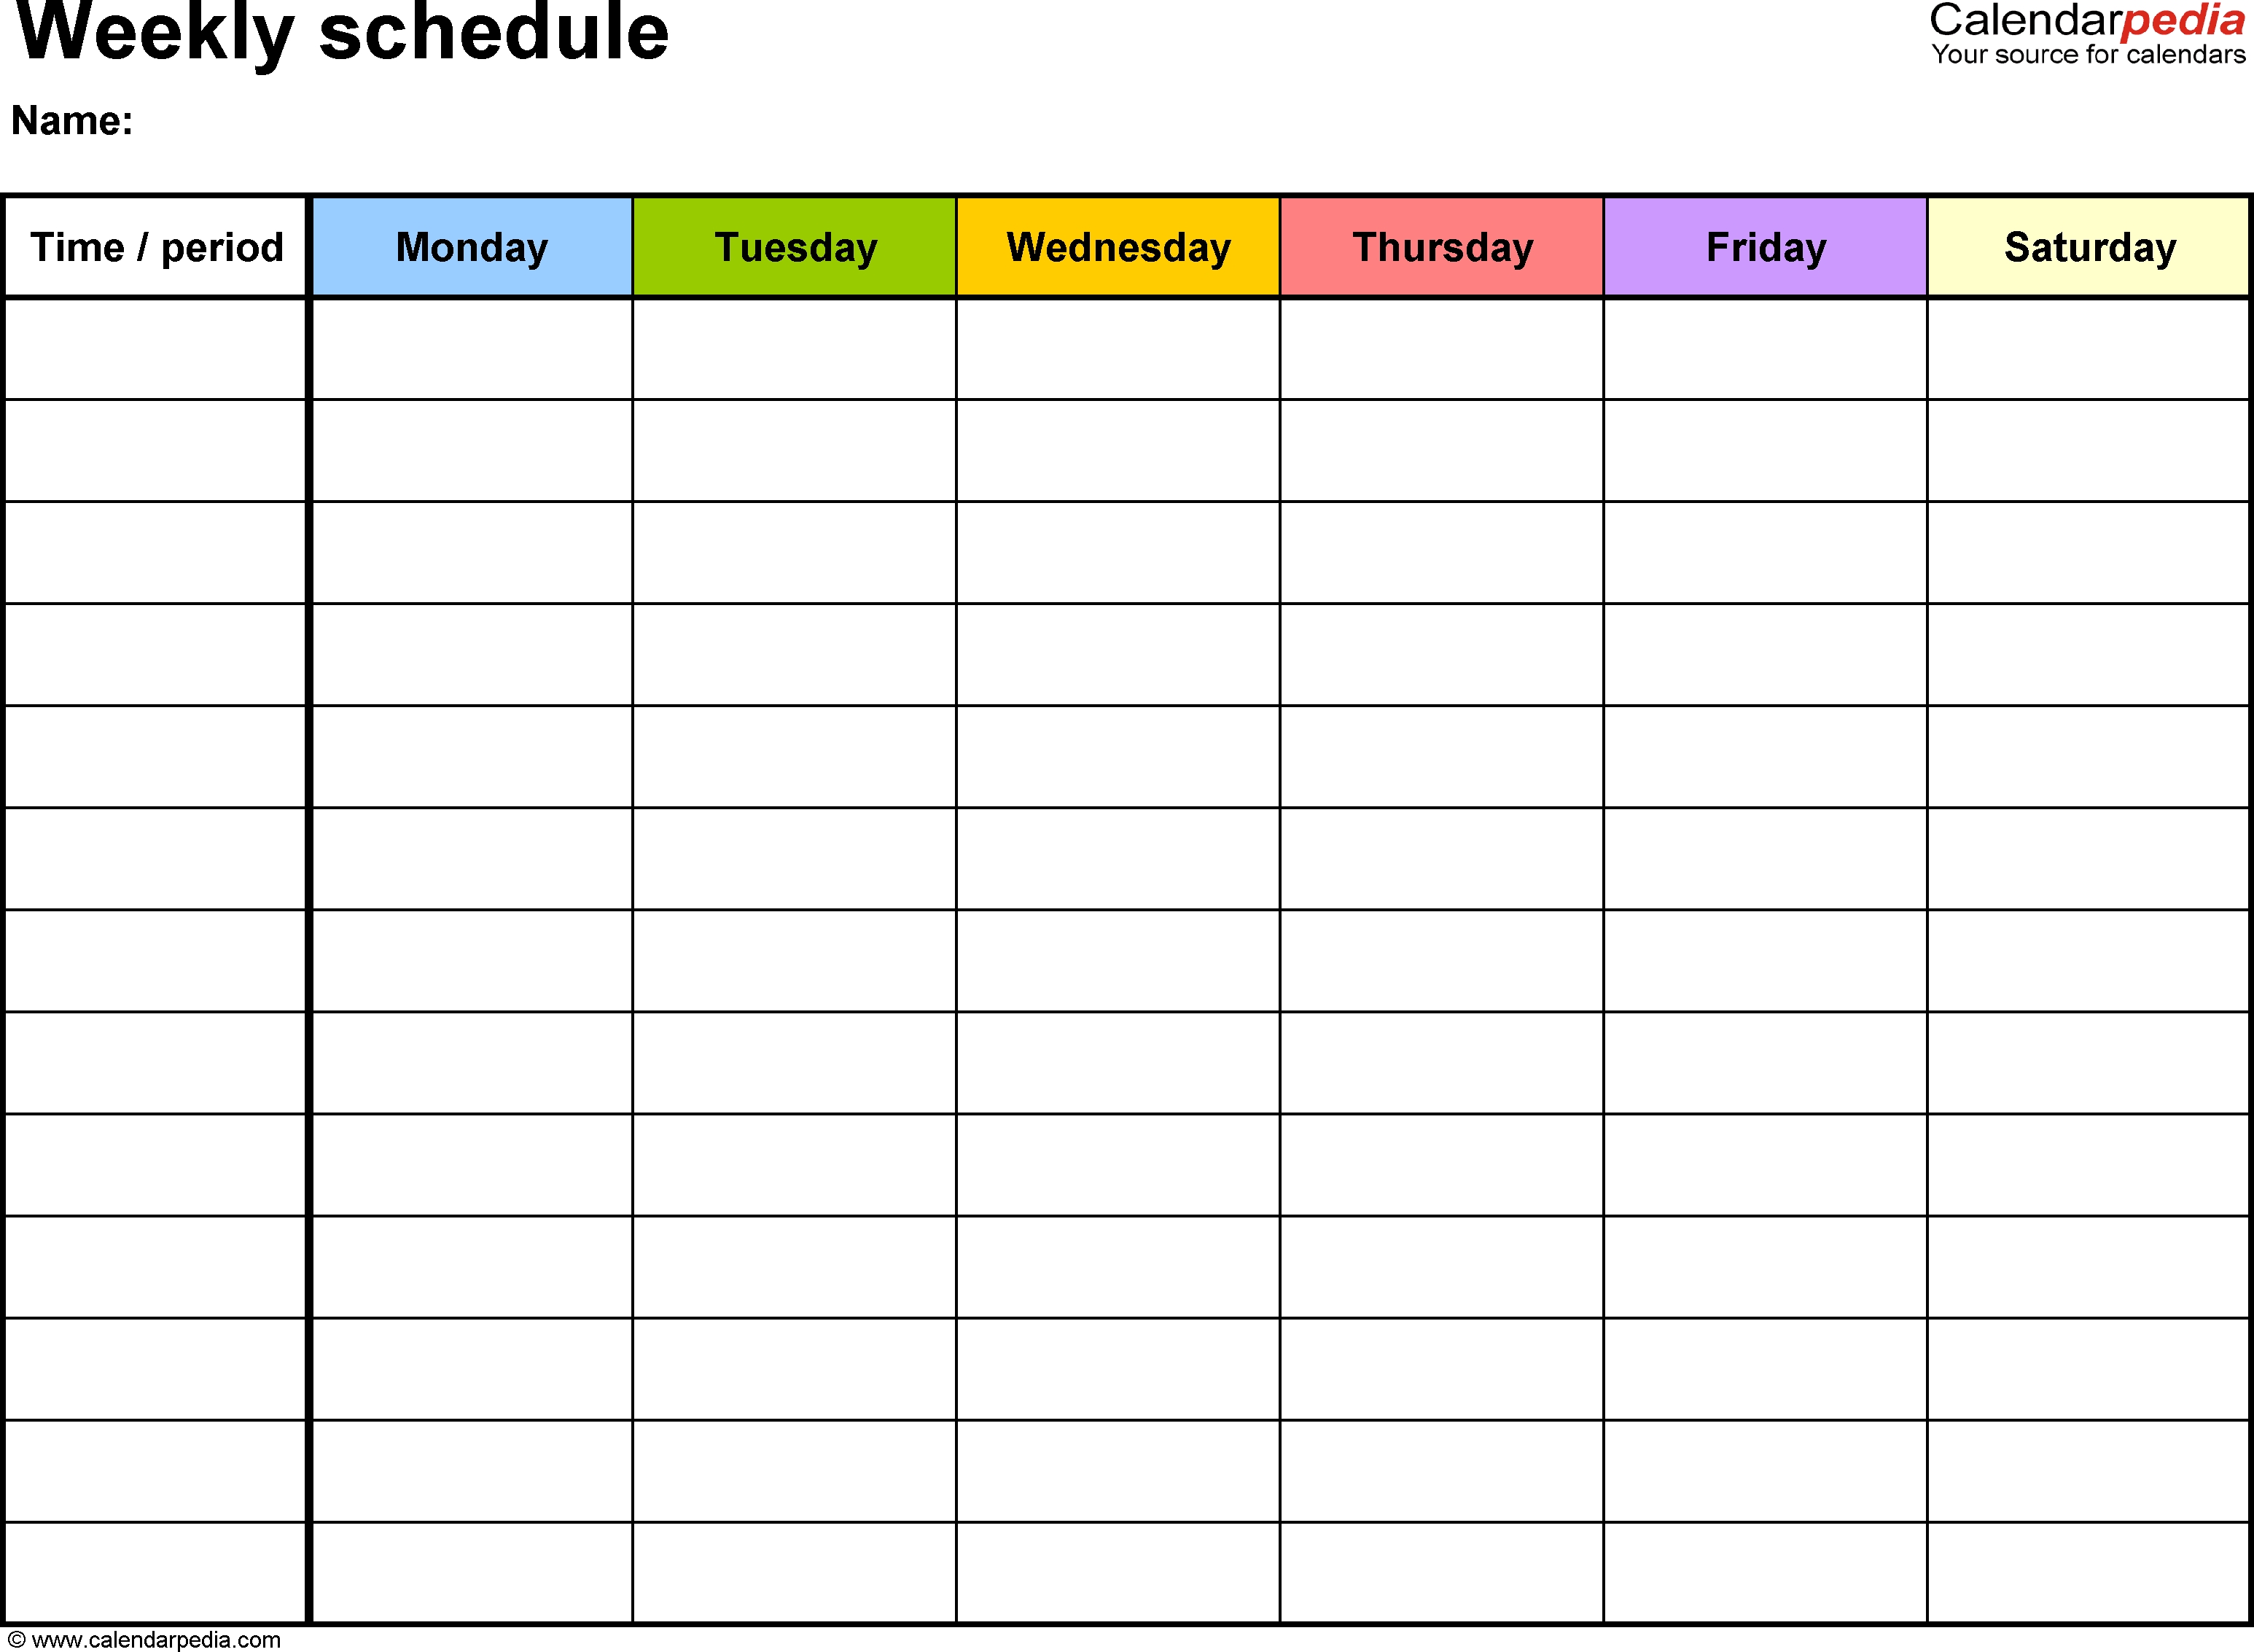 Free Weekly Schedule Templates For Word - 18 Templates within Blank Monday Through Friday Weekly Calendar Without Download